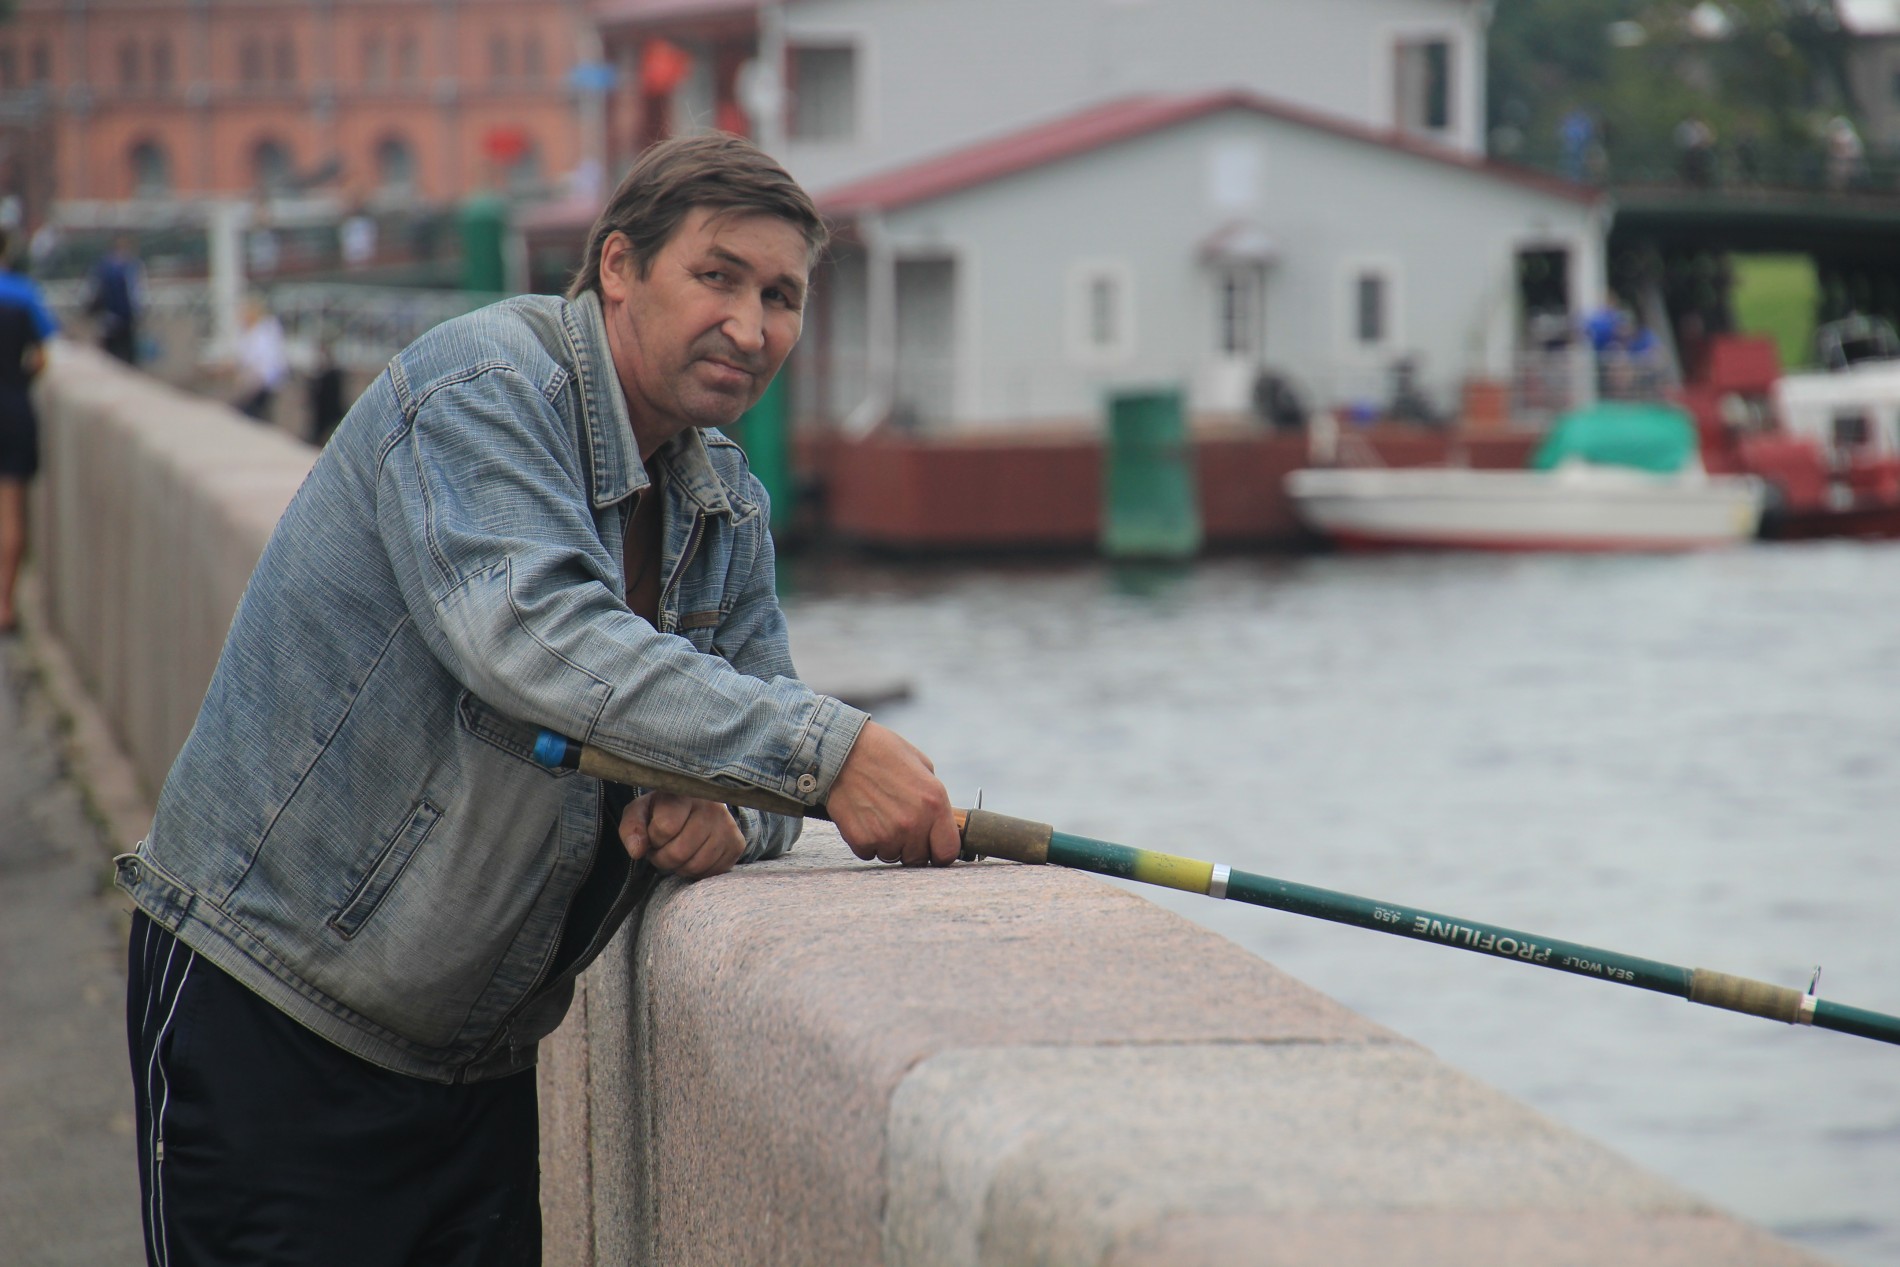 A Russian man fishes in a St. Petersburg river.